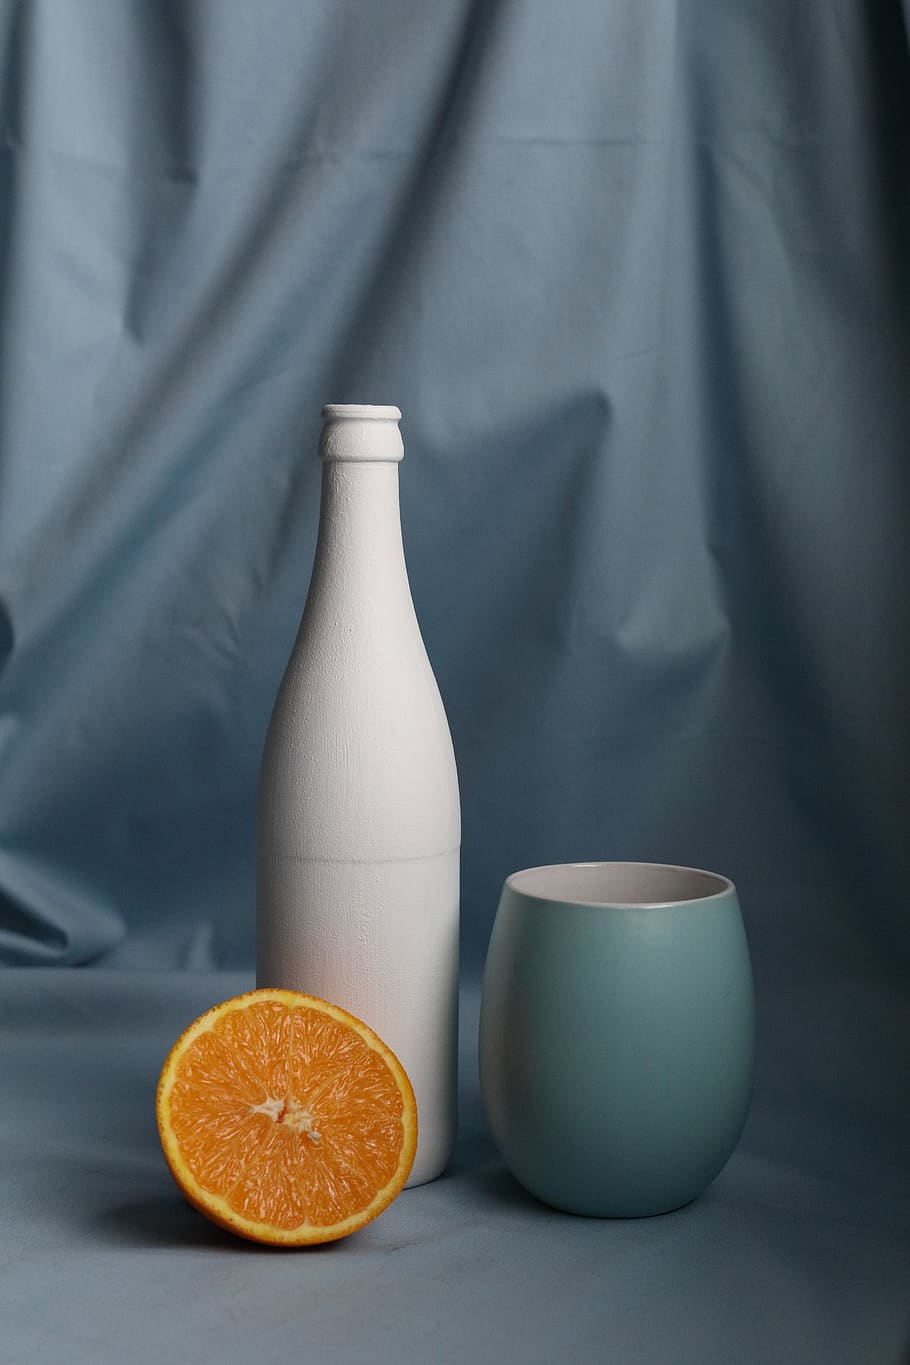 orange, fruit, food, bottle, glass, frosted, cup, drawing, paint, example